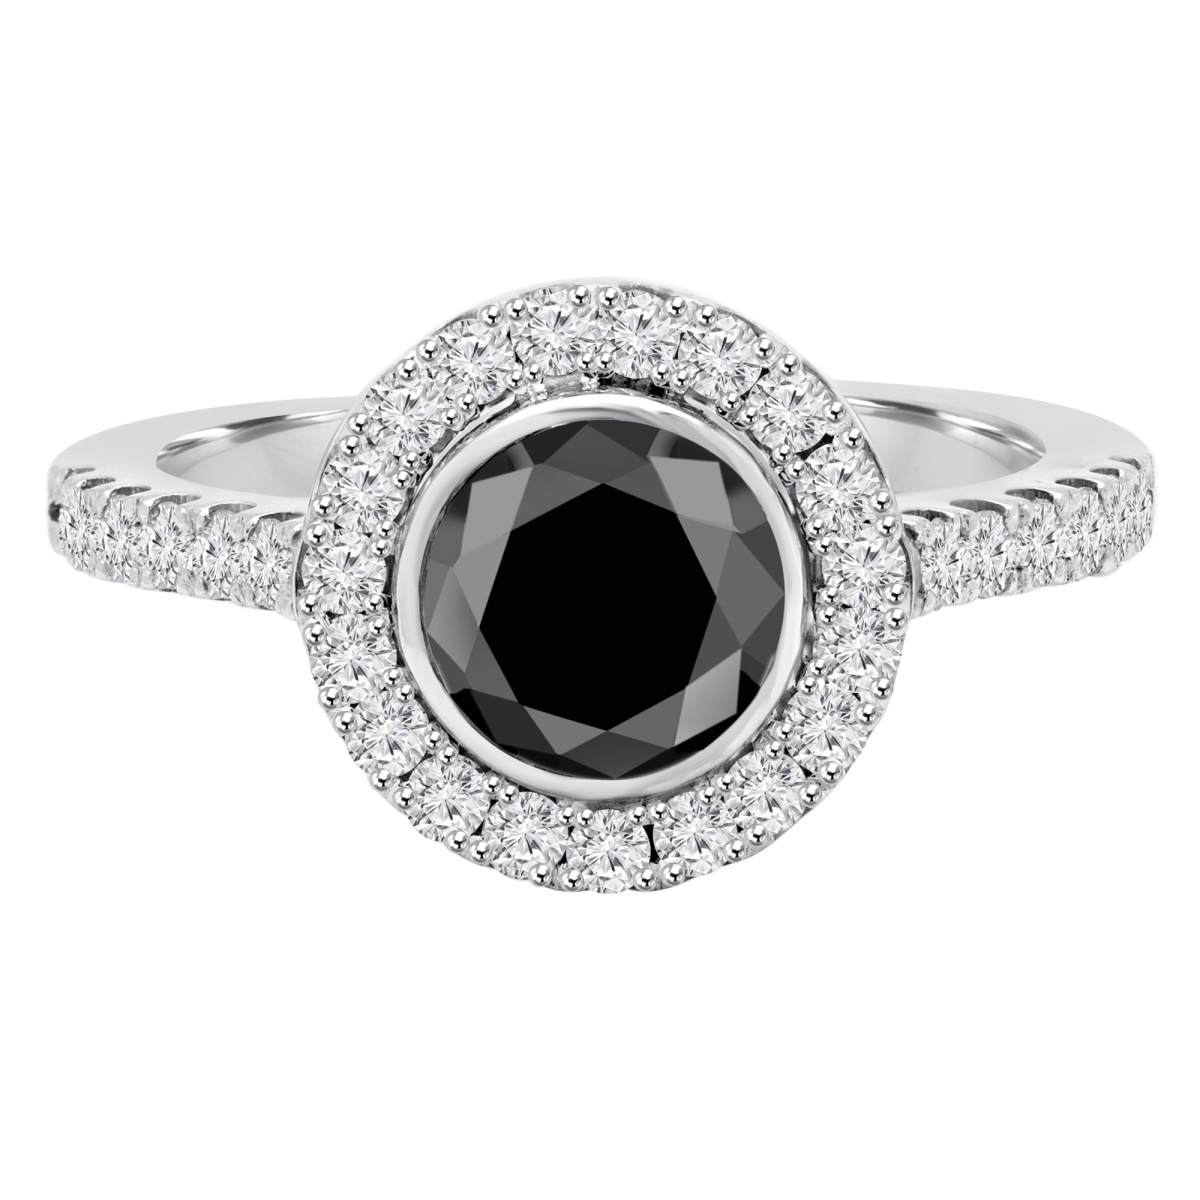 MD190288-5.25 2 CTW Round Black Diamond Bezel Set Halo Engagement Ring in 14K White Gold with Accents - Size 5.25 -  Majesty Diamonds